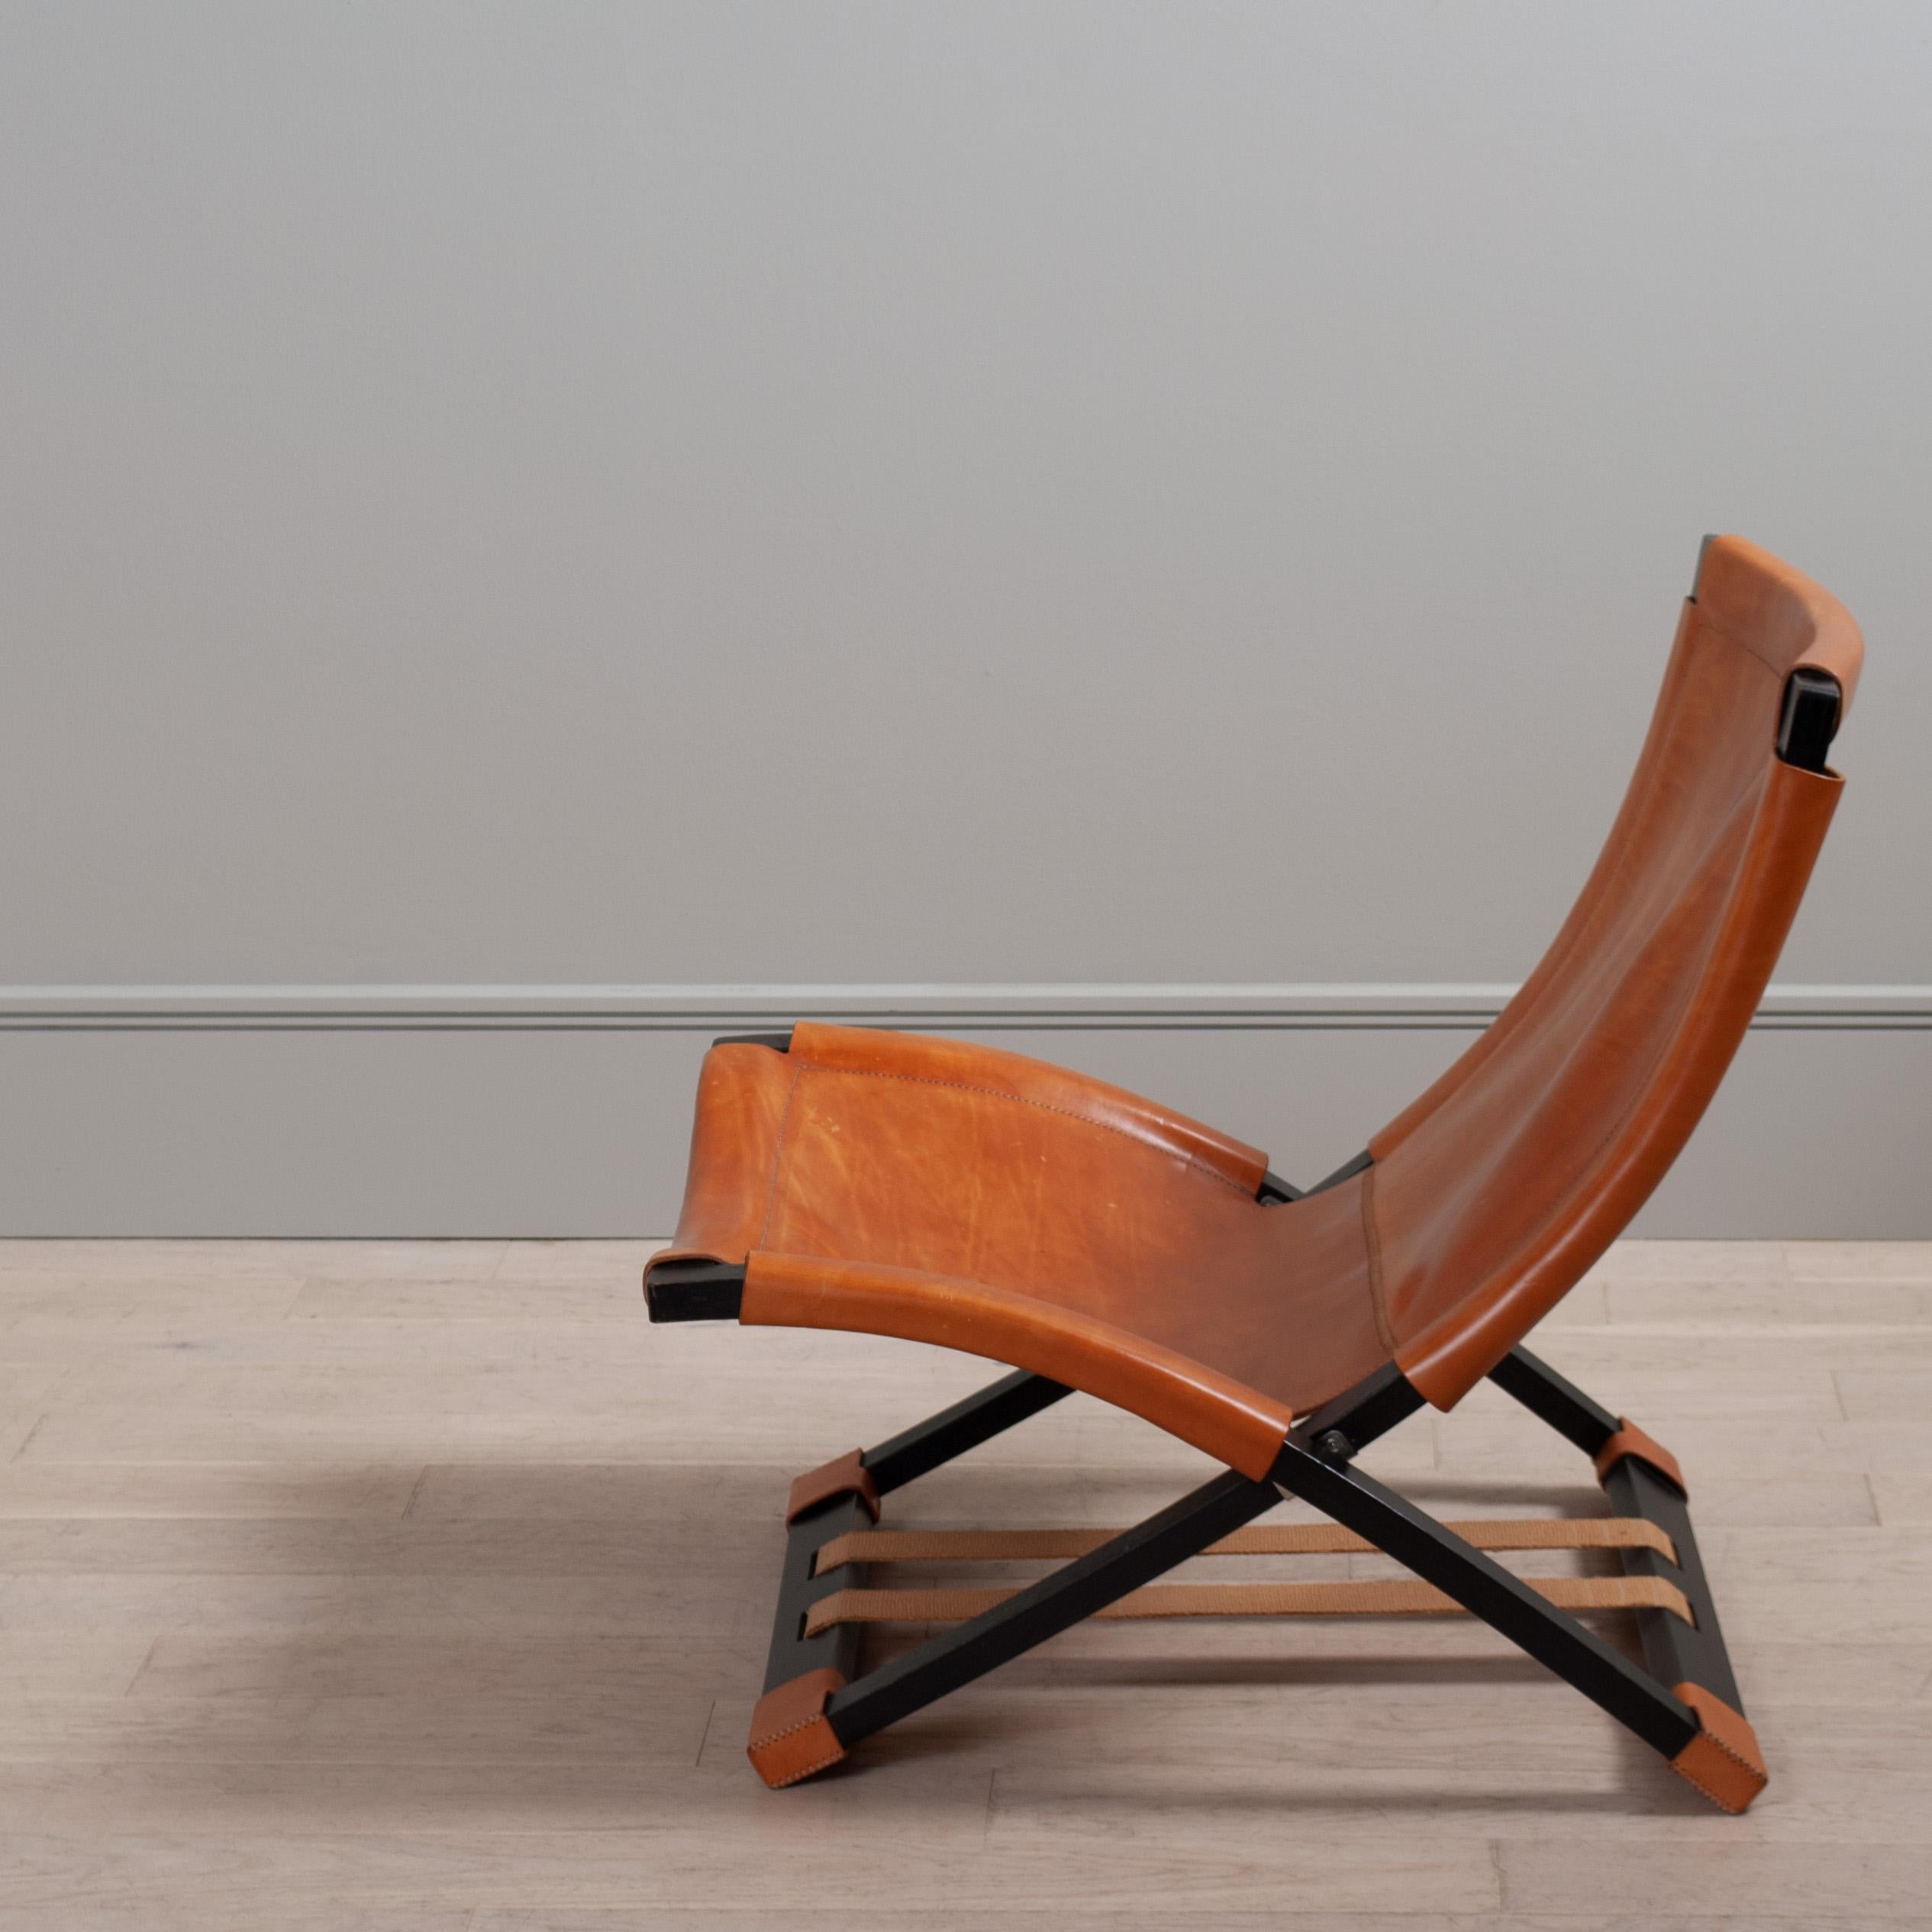 A special commission - hand stitched tan bridle leather X frame chair by Ingmar Relling for Westnofa, Norway circa 1960’s. Beautifully coloured patina.
Original labels intact. Ebonised beech bentwood frame.
Cleaned, polished and conditioned.